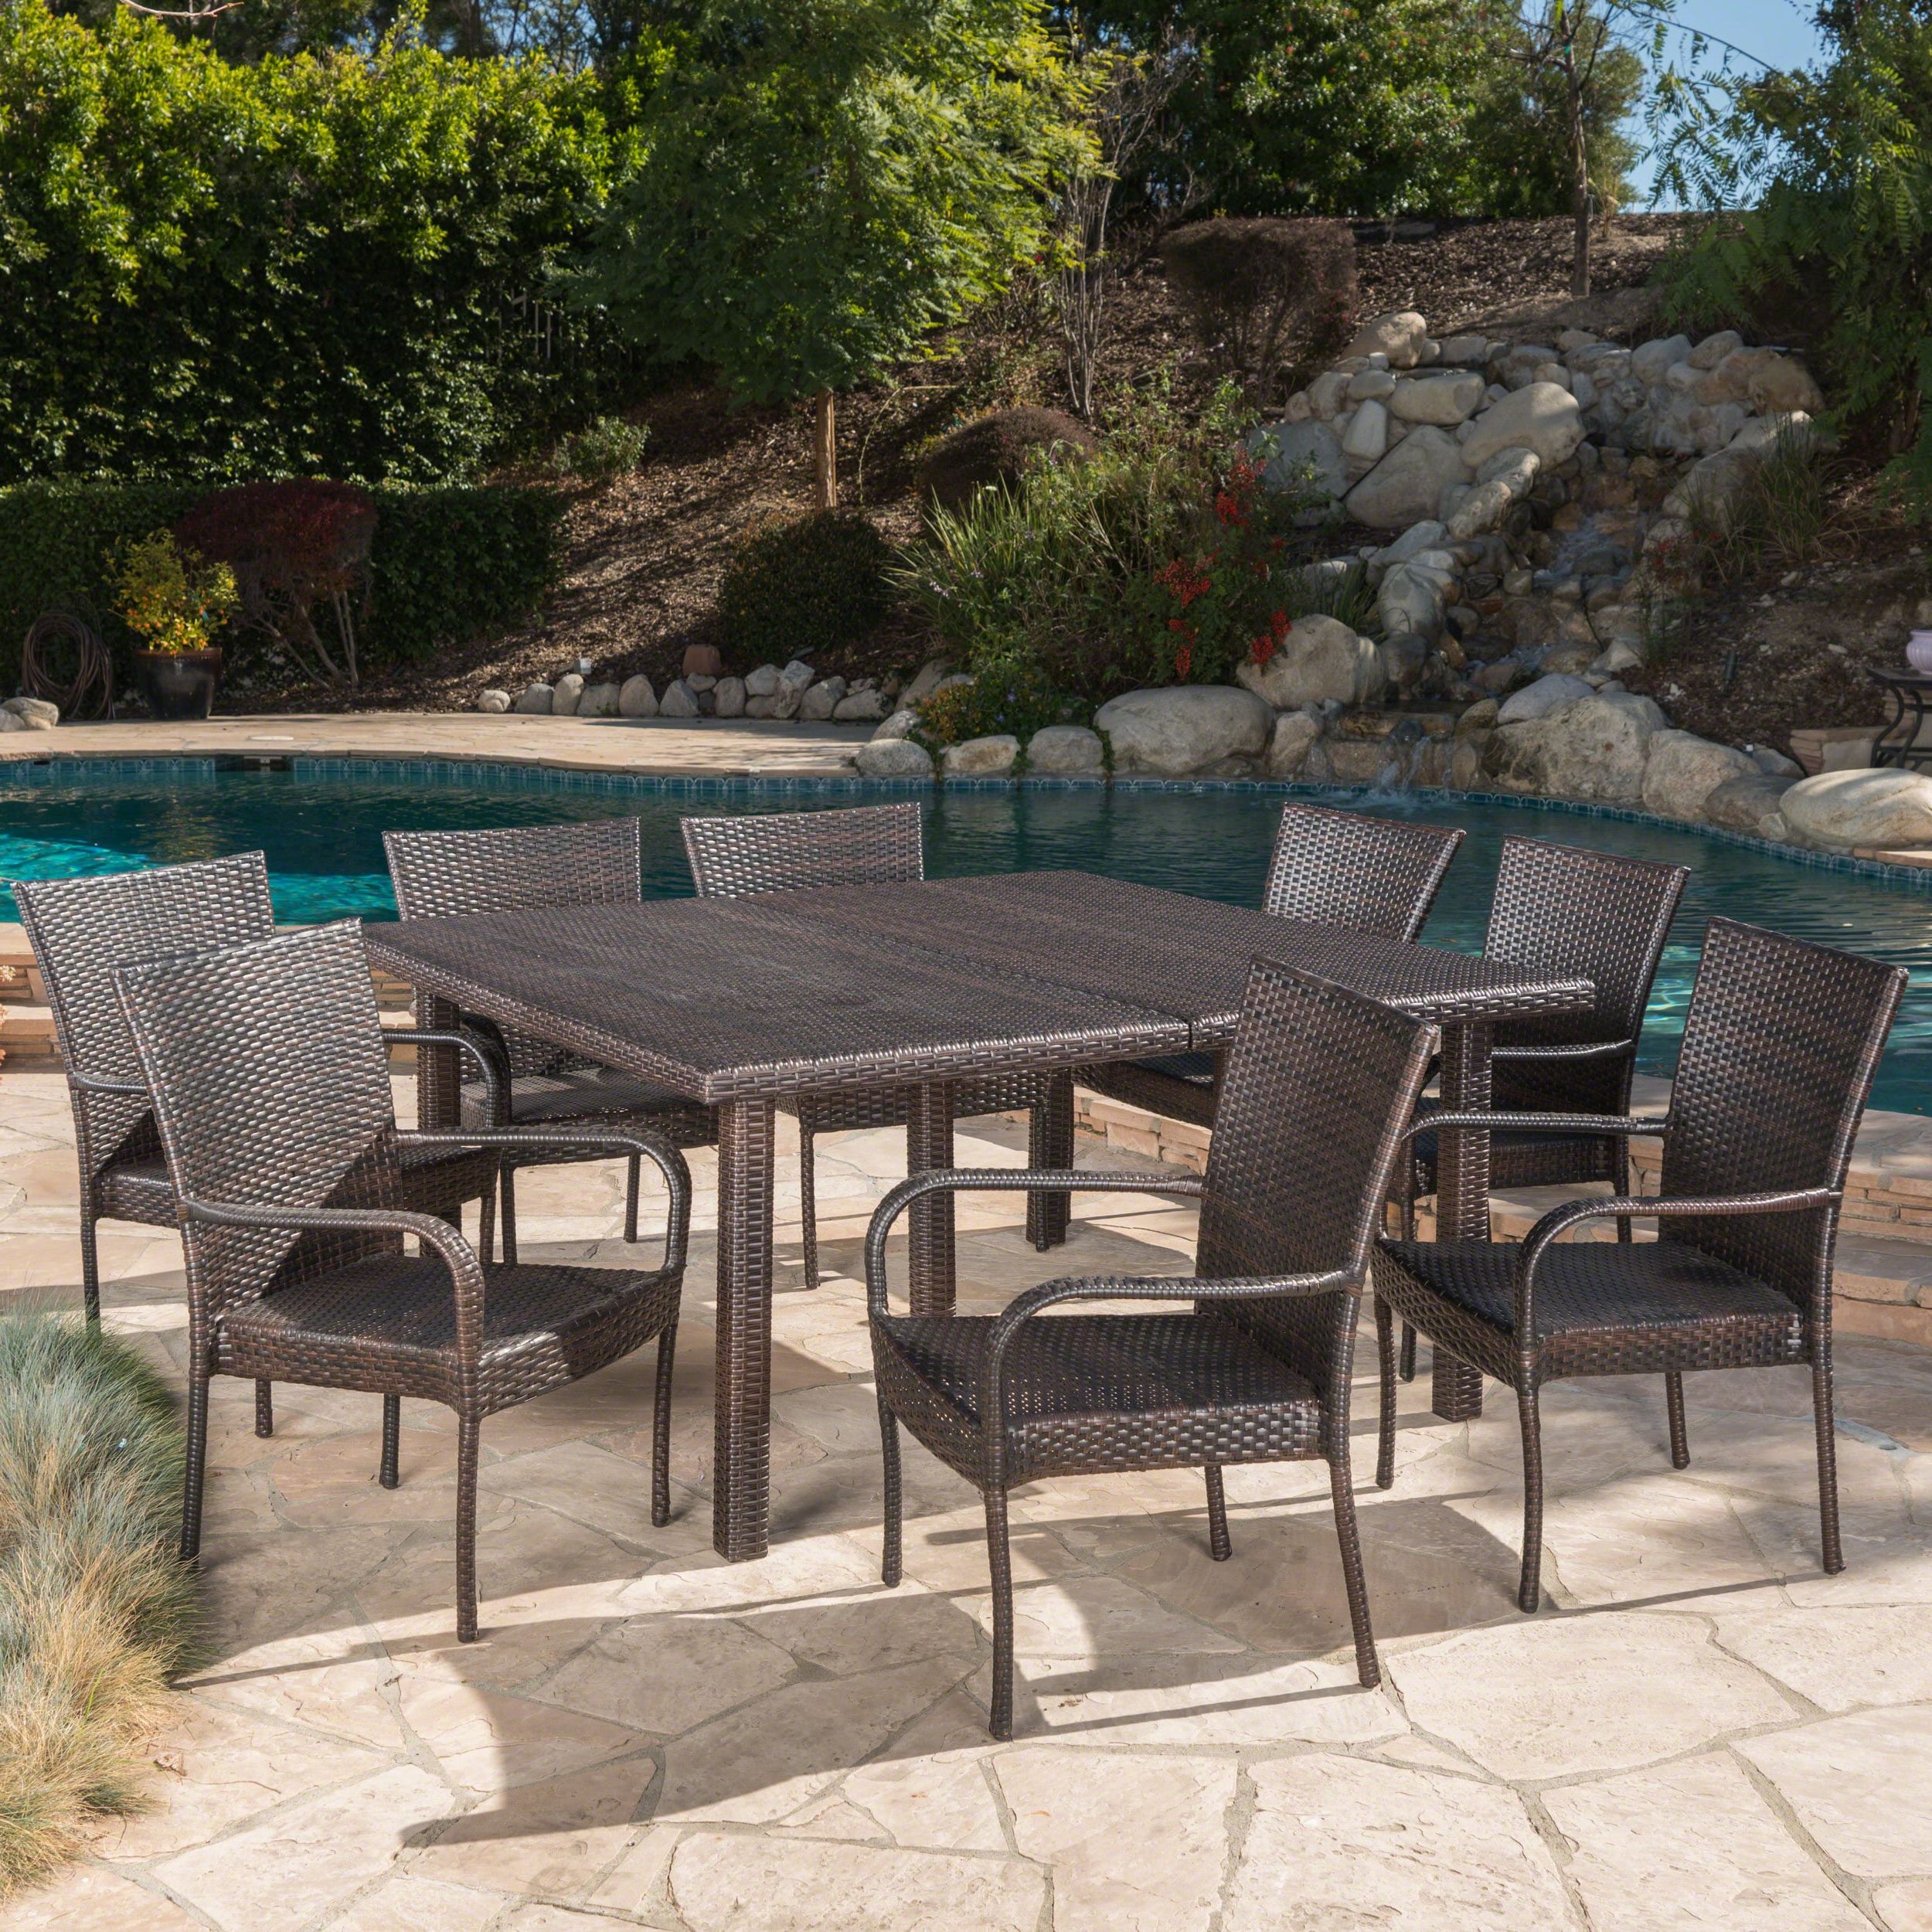 9 Piece Outdoor Square Dining Sets With 2020 Fiona Outdoor 9 Piece Square Wicker Dining Setbrown 9 Piece Sets (View 13 of 15)